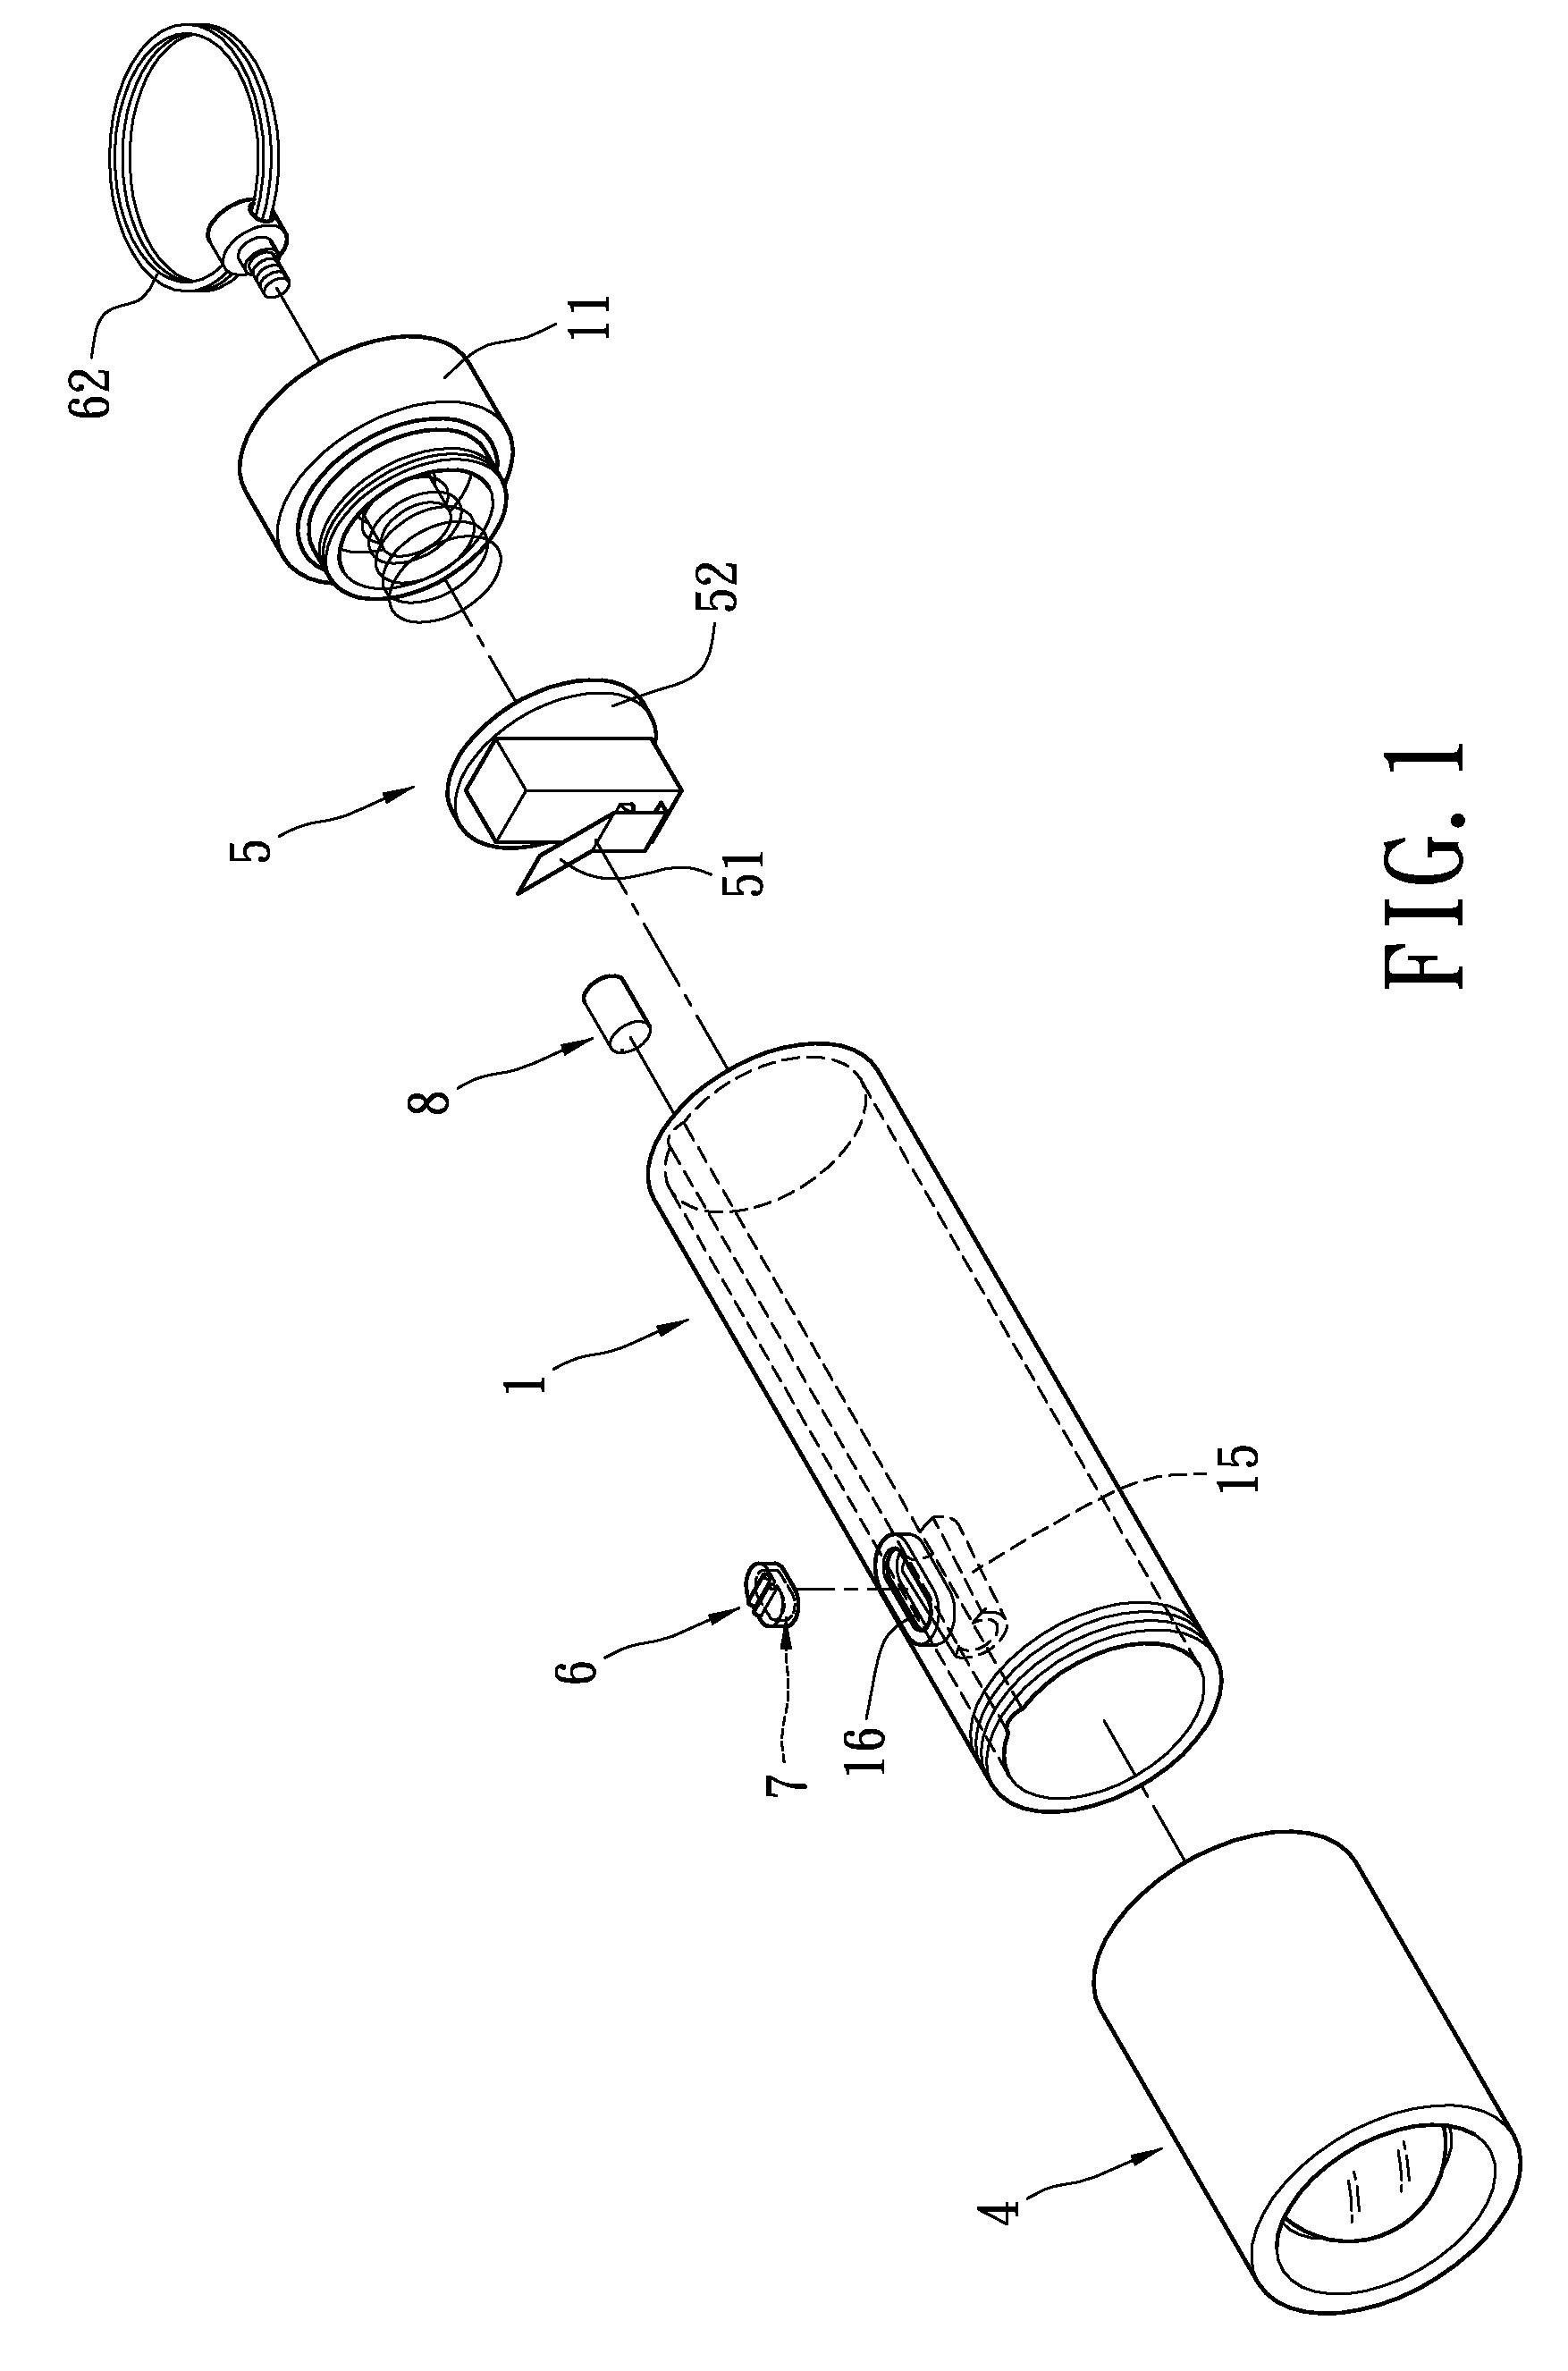 Control switch for controlling magnetic line of force